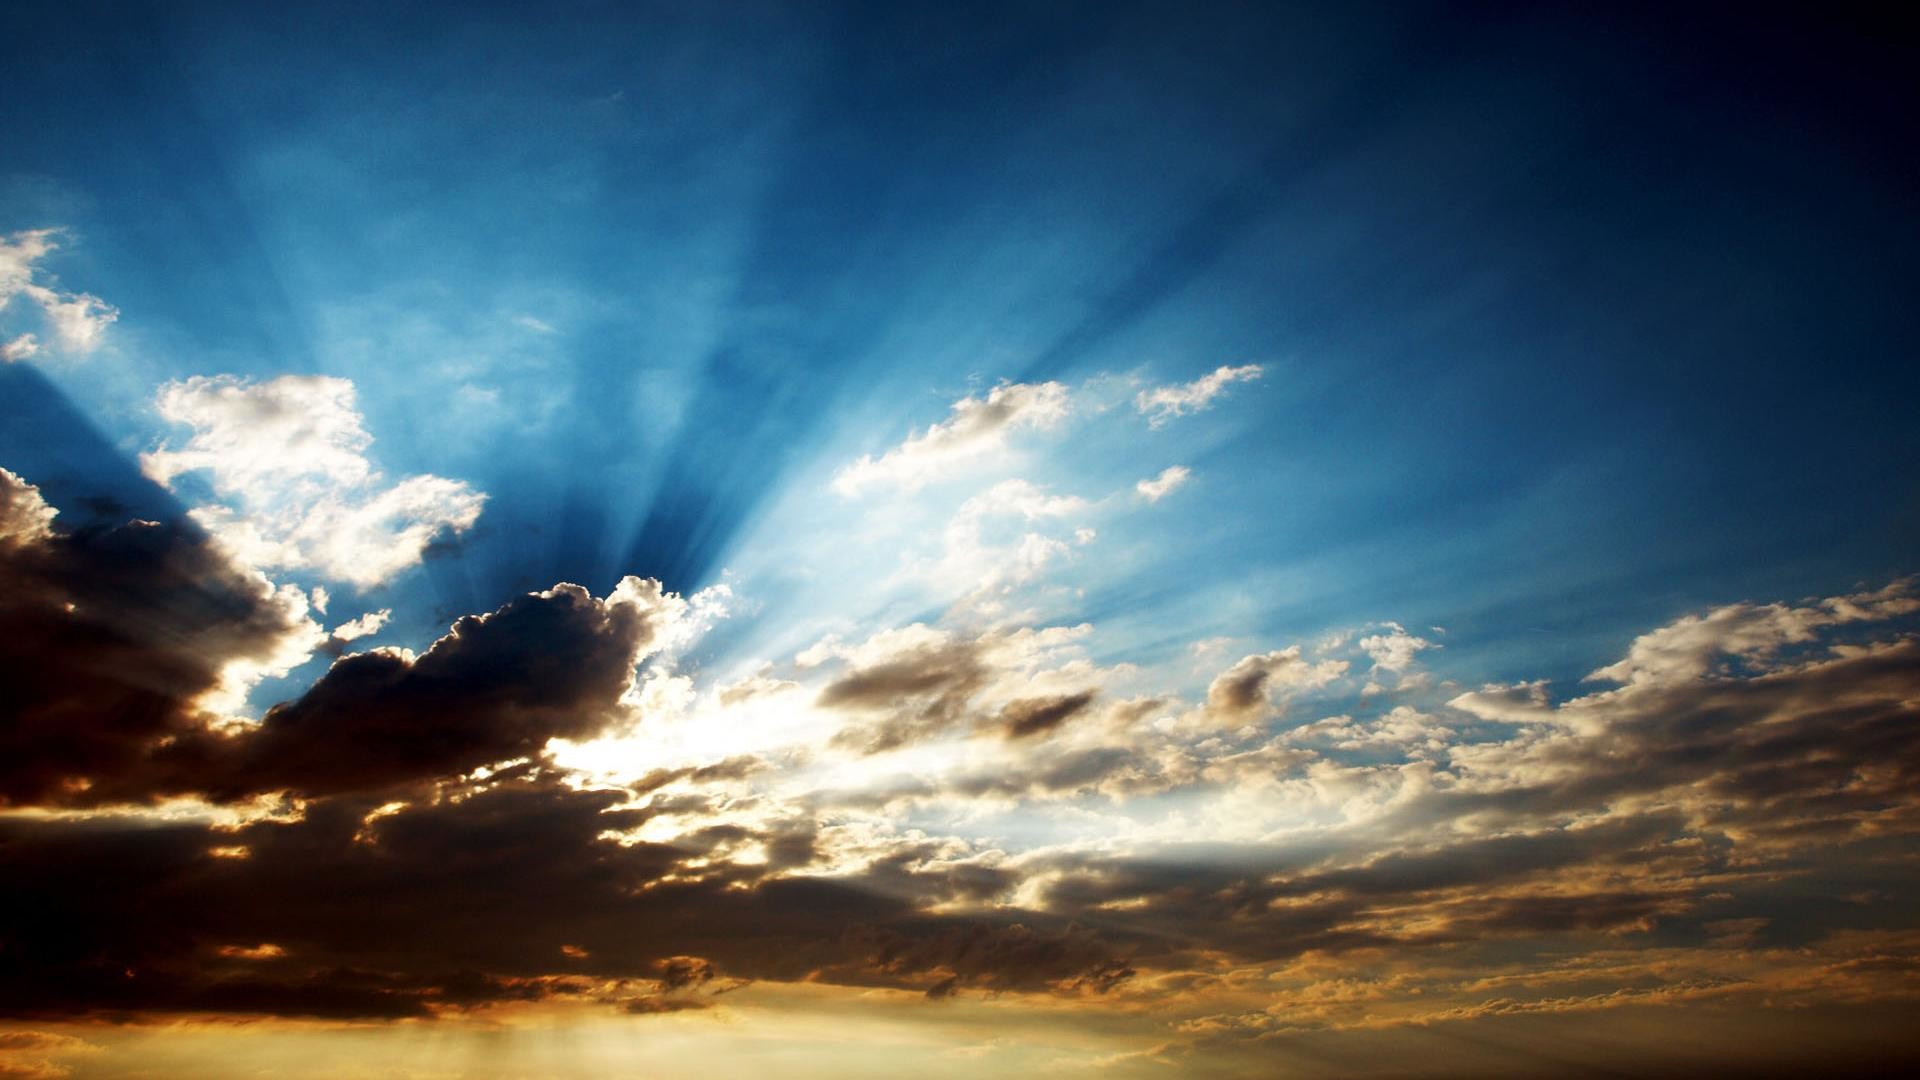 1920x1080  The sky and cloud photography wide  wallpapers:1280x800,1440x900,1680x1050 - hd